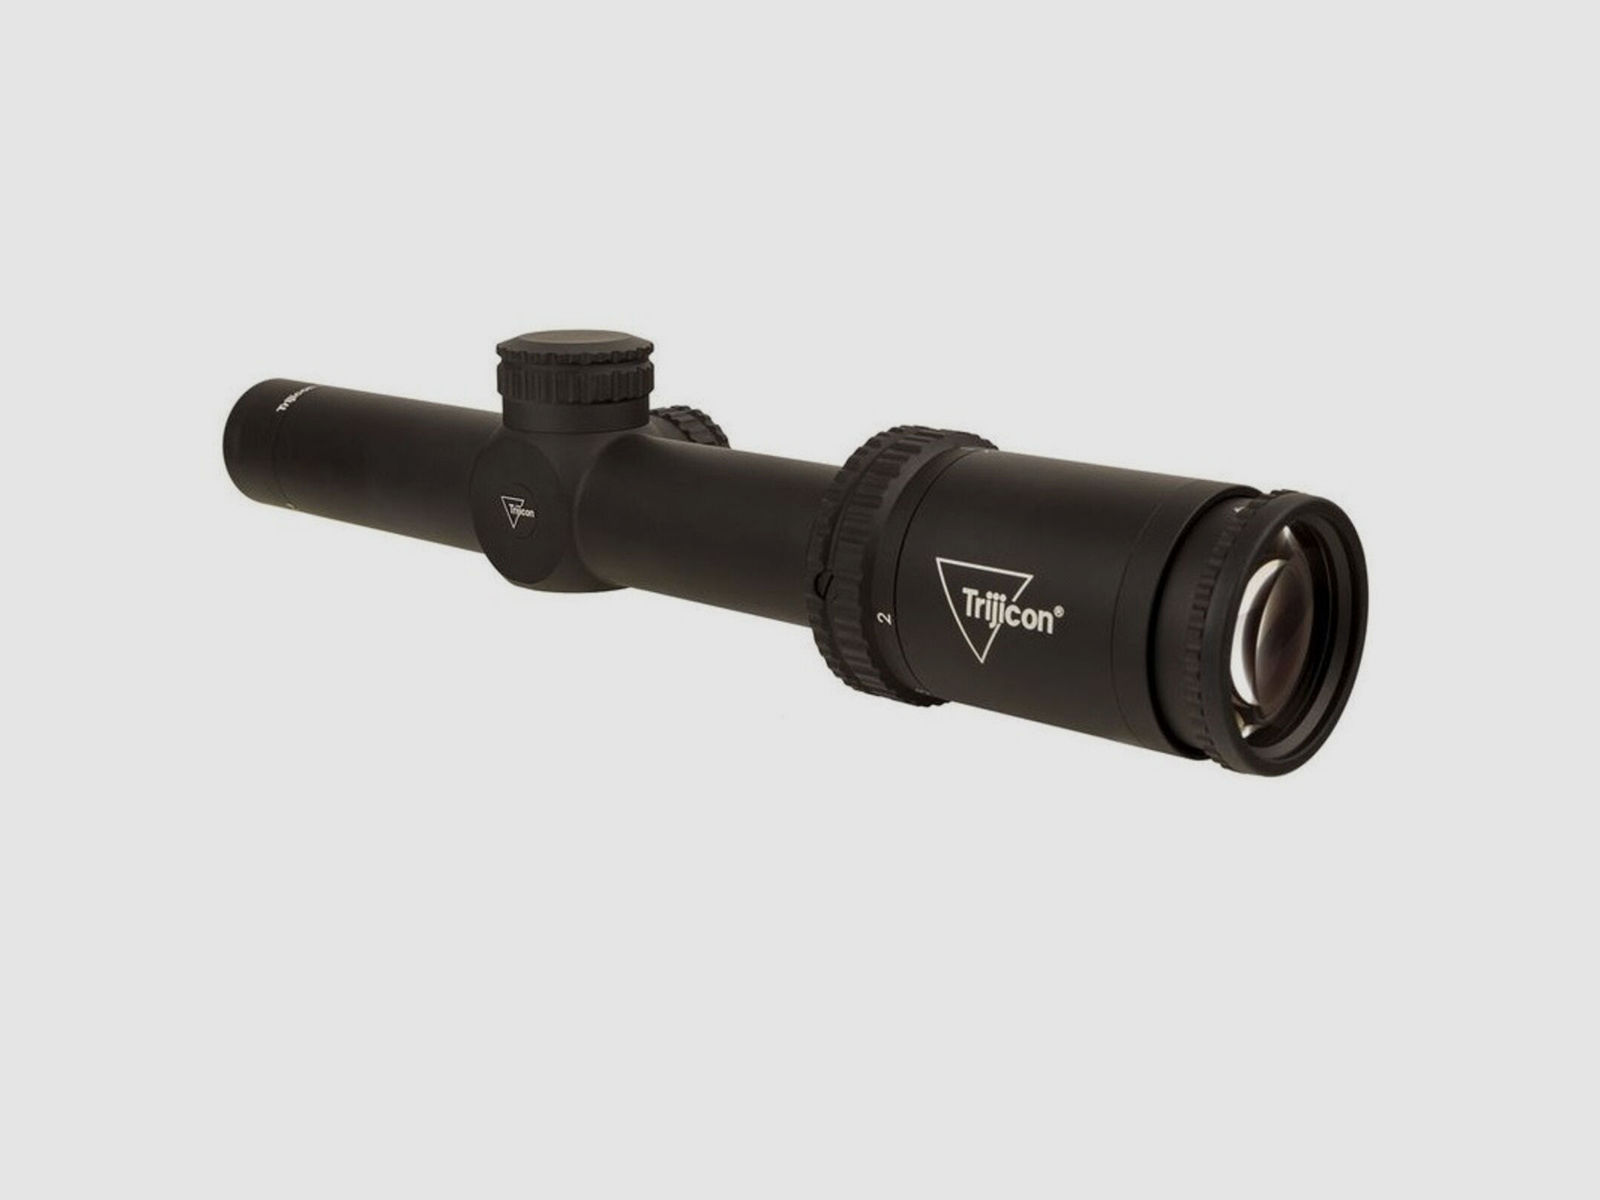 Trijicon	 Ascent 1-4x24 Target Holds Black